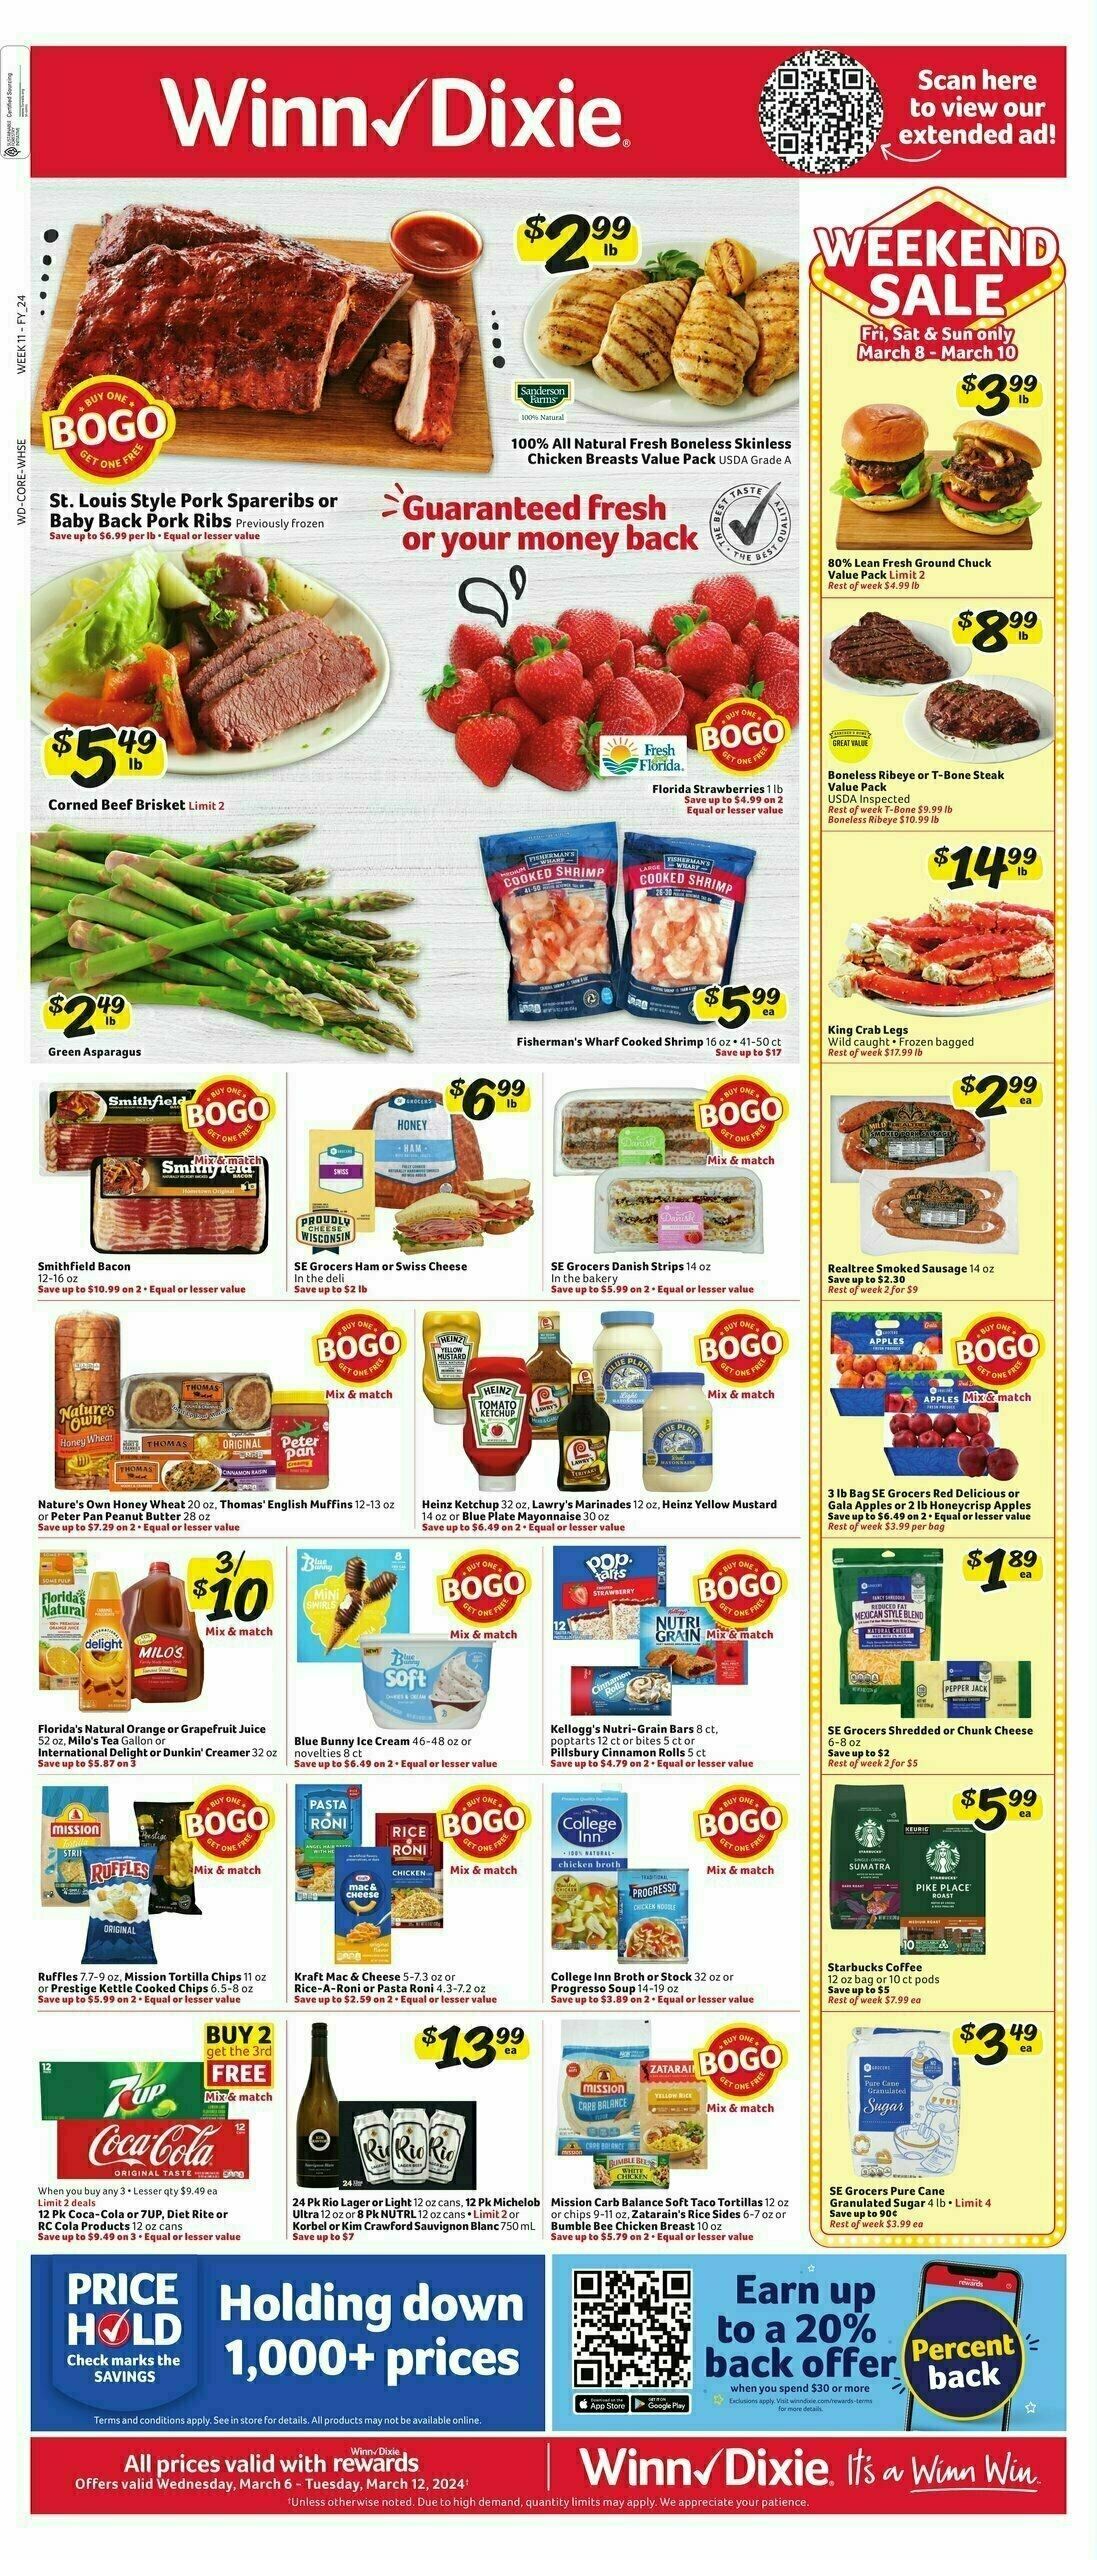 Winn-Dixie Weekly Ad from March 6